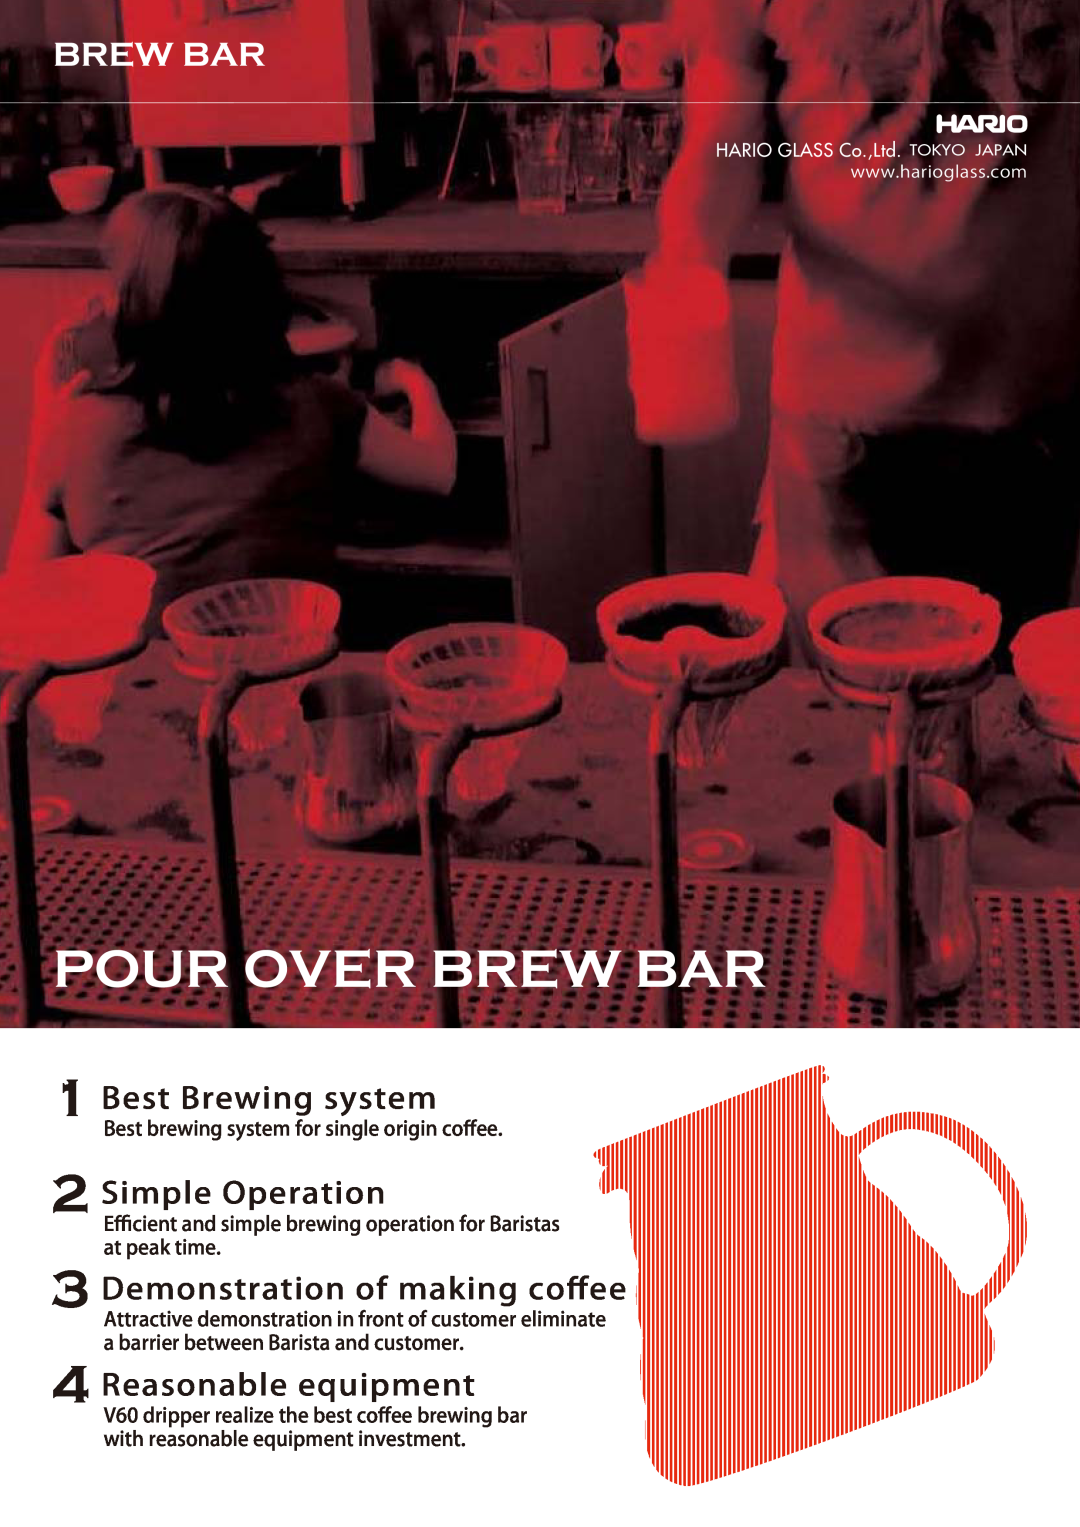 Hario Glass SCA-5, NXA-5, TCA-5 Pour Over Brew Bar, Best Brewing system, Simple Operation, Demonstration of making coﬀee 